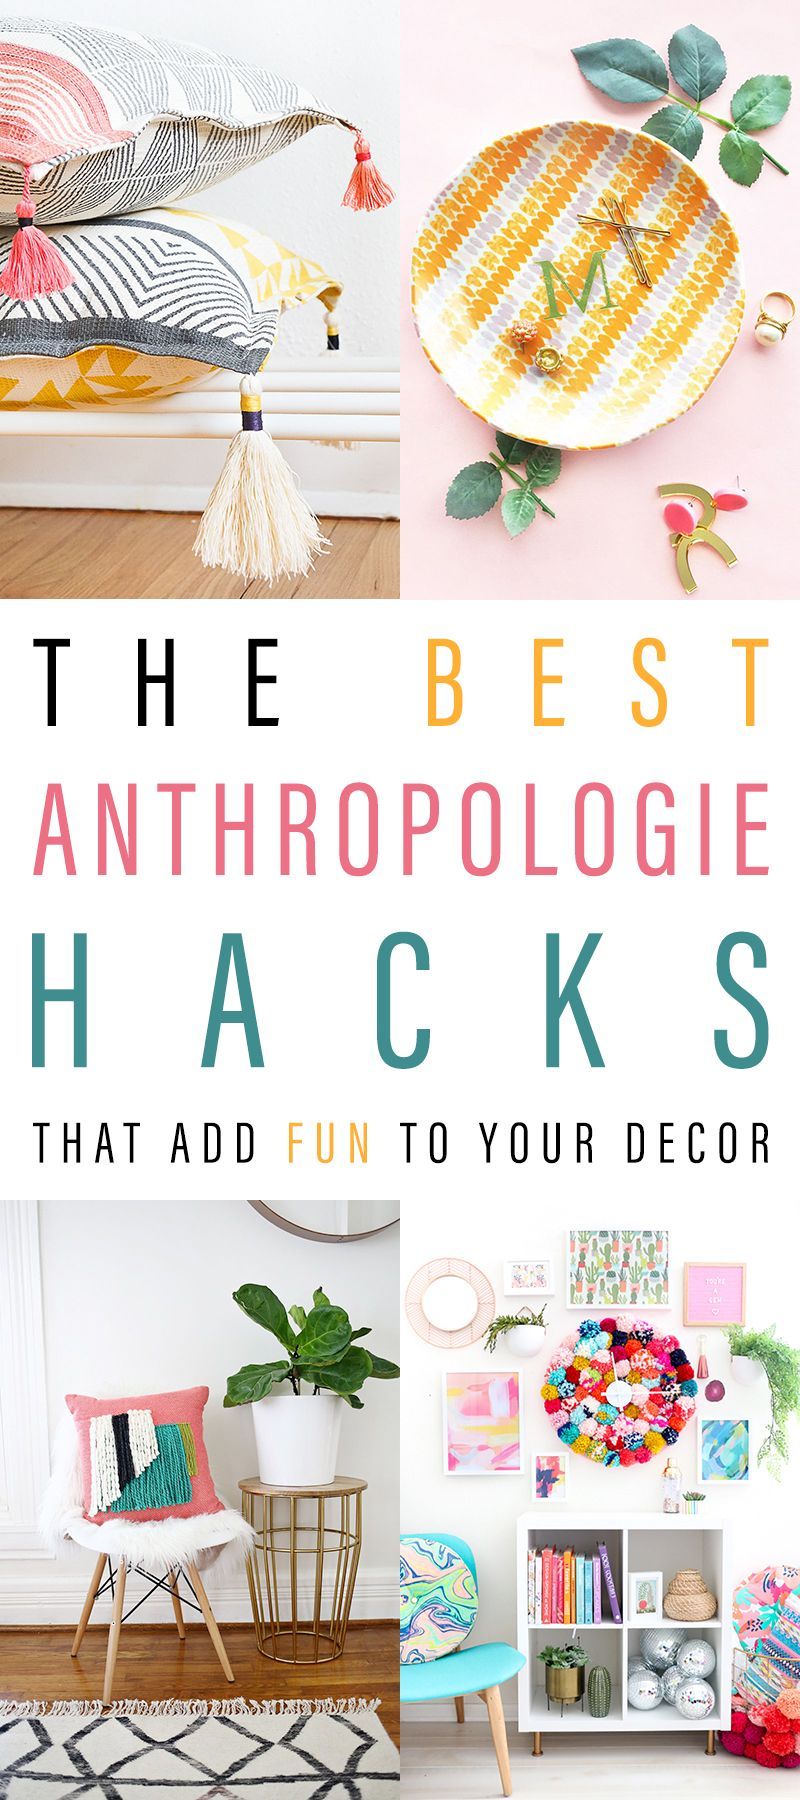 15 diy projects For The Home hacks ideas